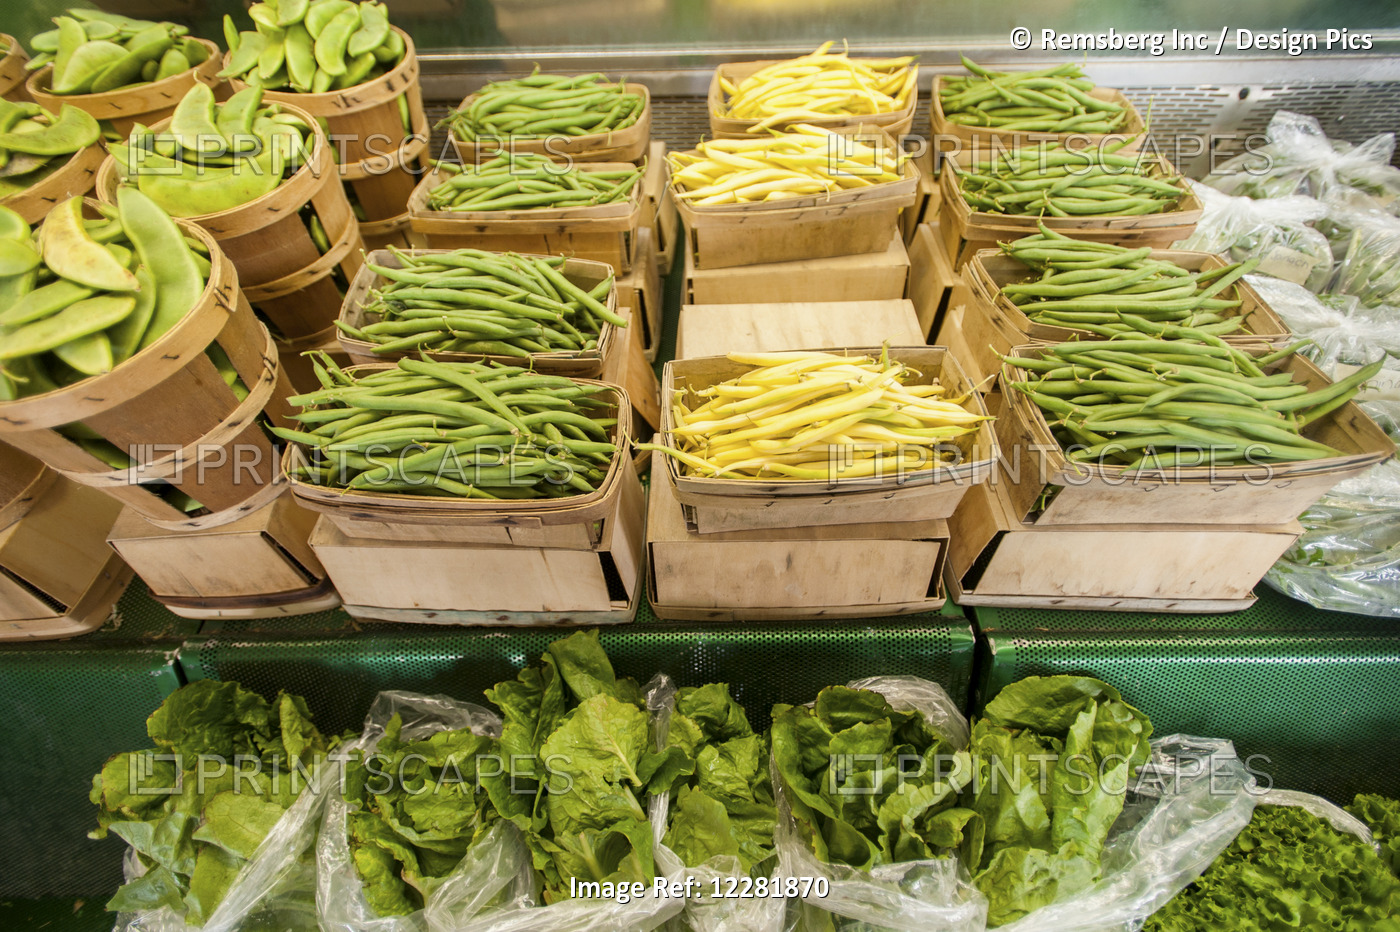 Fresh Vegetables For Sale At A Store; Denton, Maryland, United States Of America